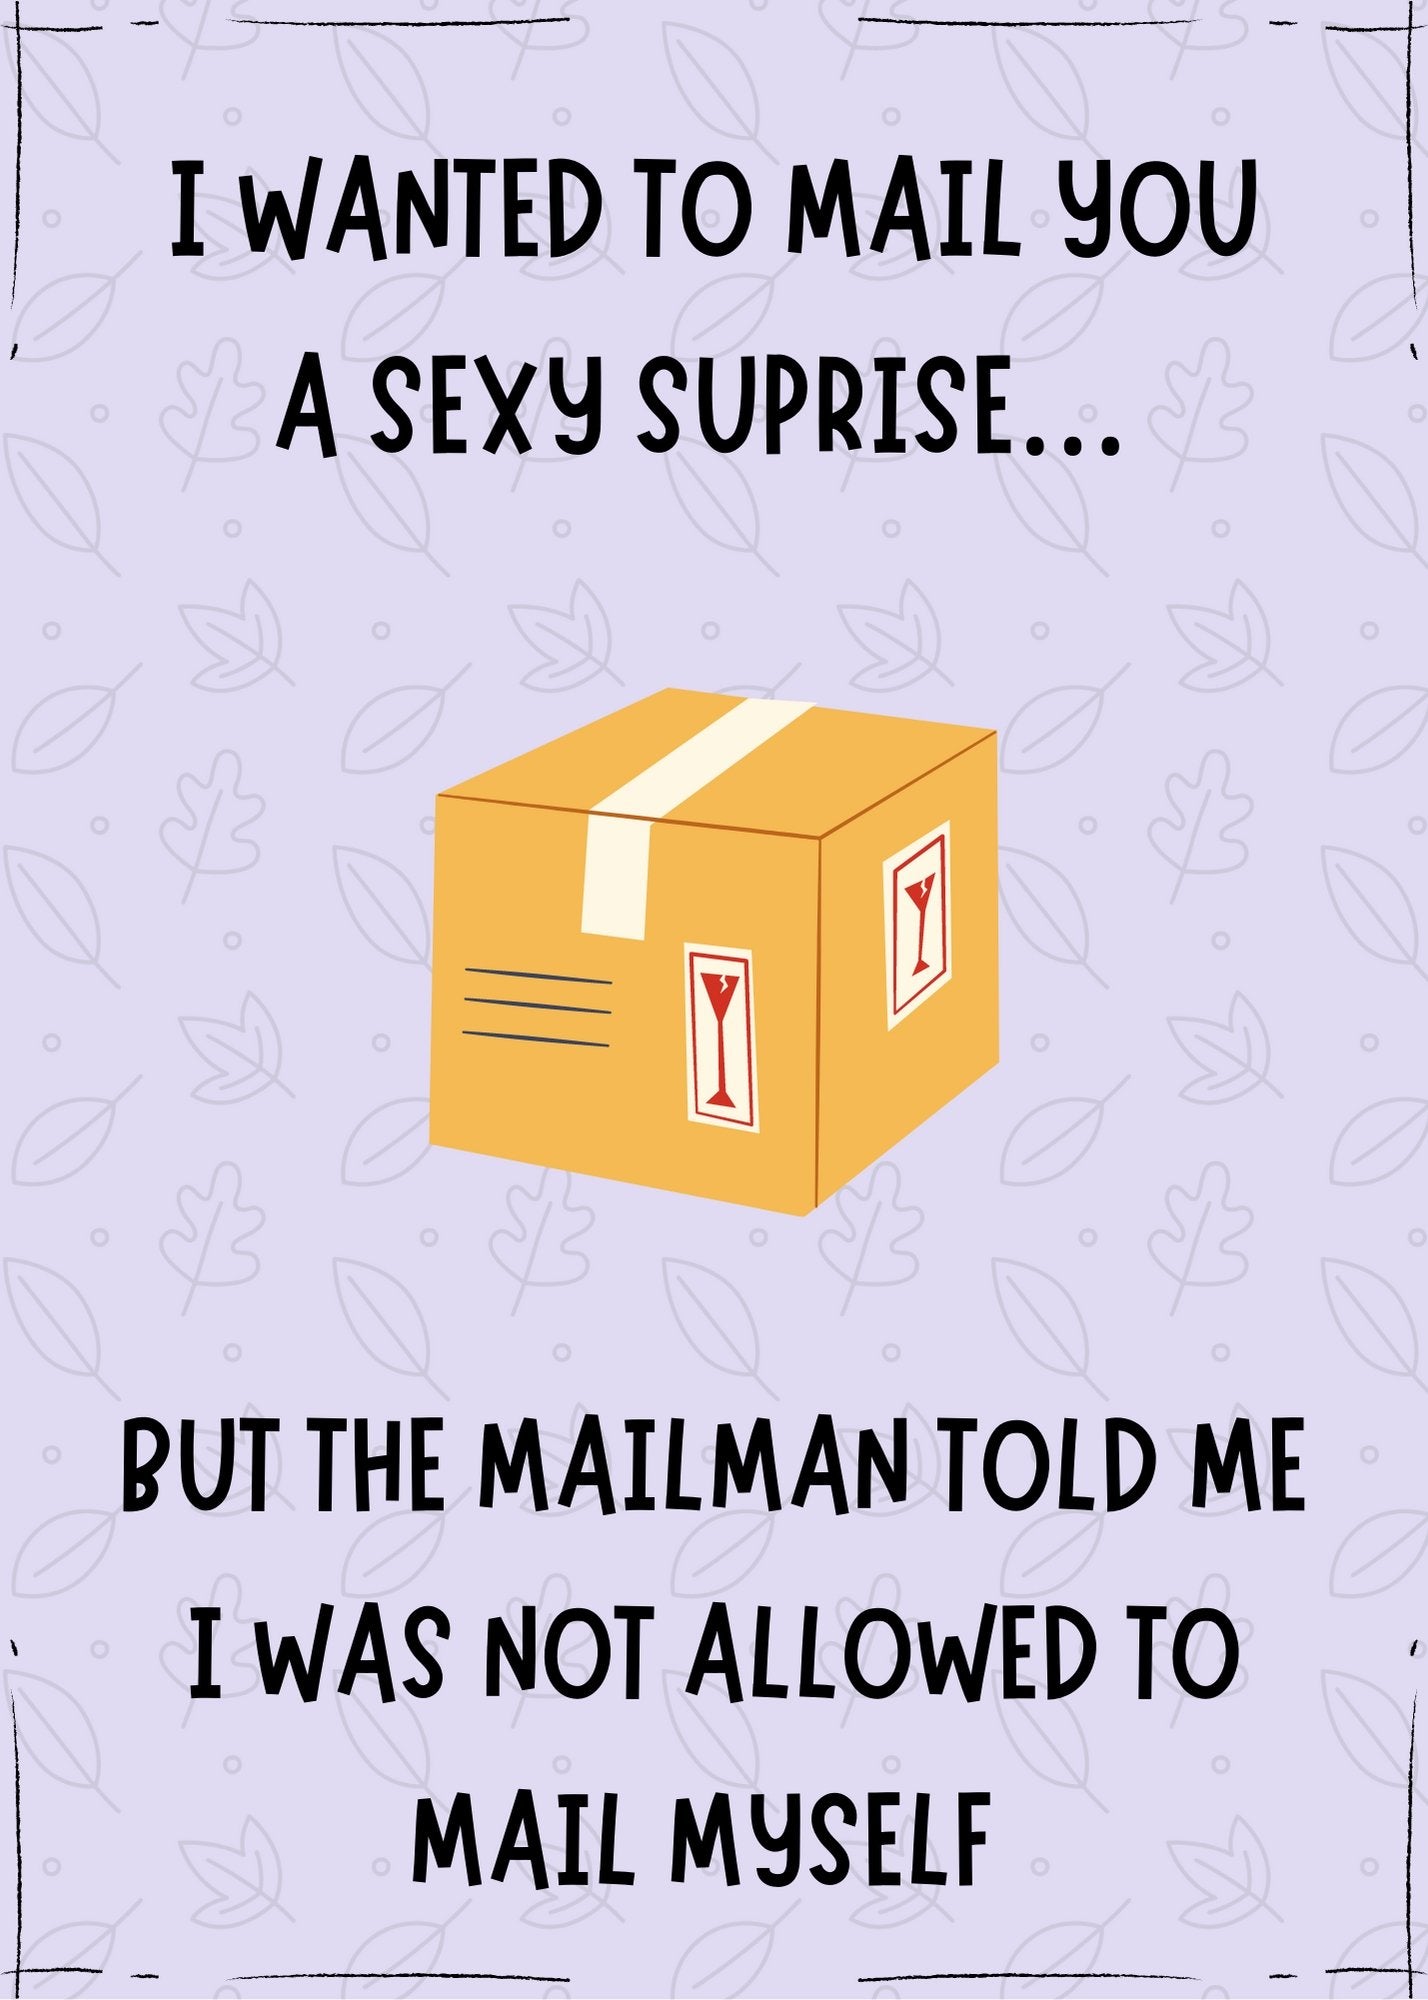 “Mail A Sexy Surprise” Happy Birthday Card Template (Digital Download)  Weaver Custom Engravings Digital Downloads   